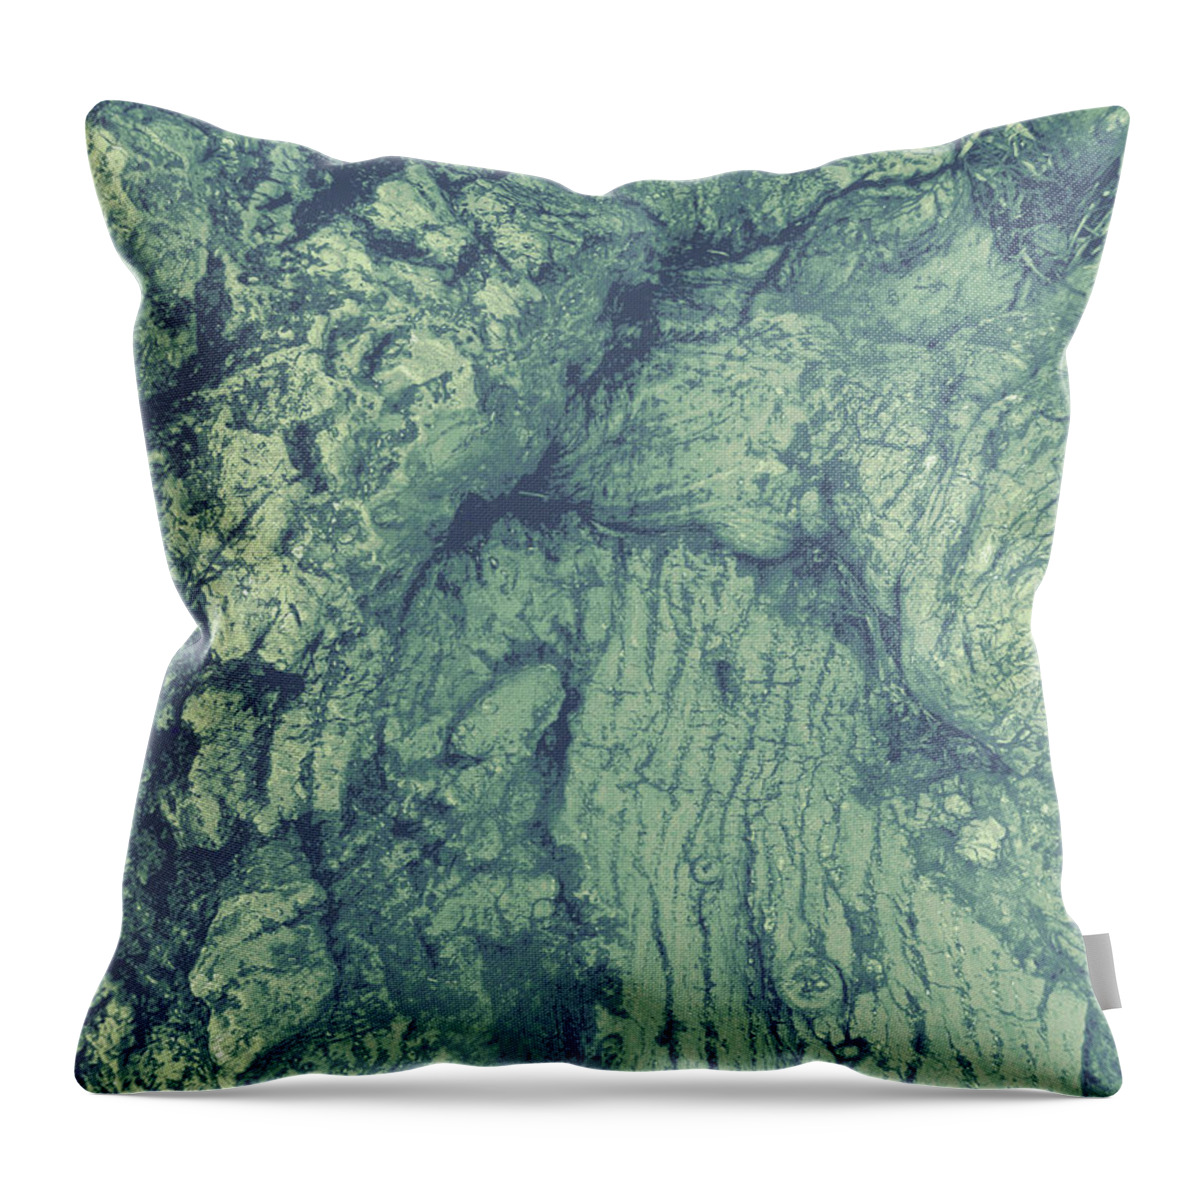 Tree Throw Pillow featuring the photograph Old Man Tree by Alison Stein